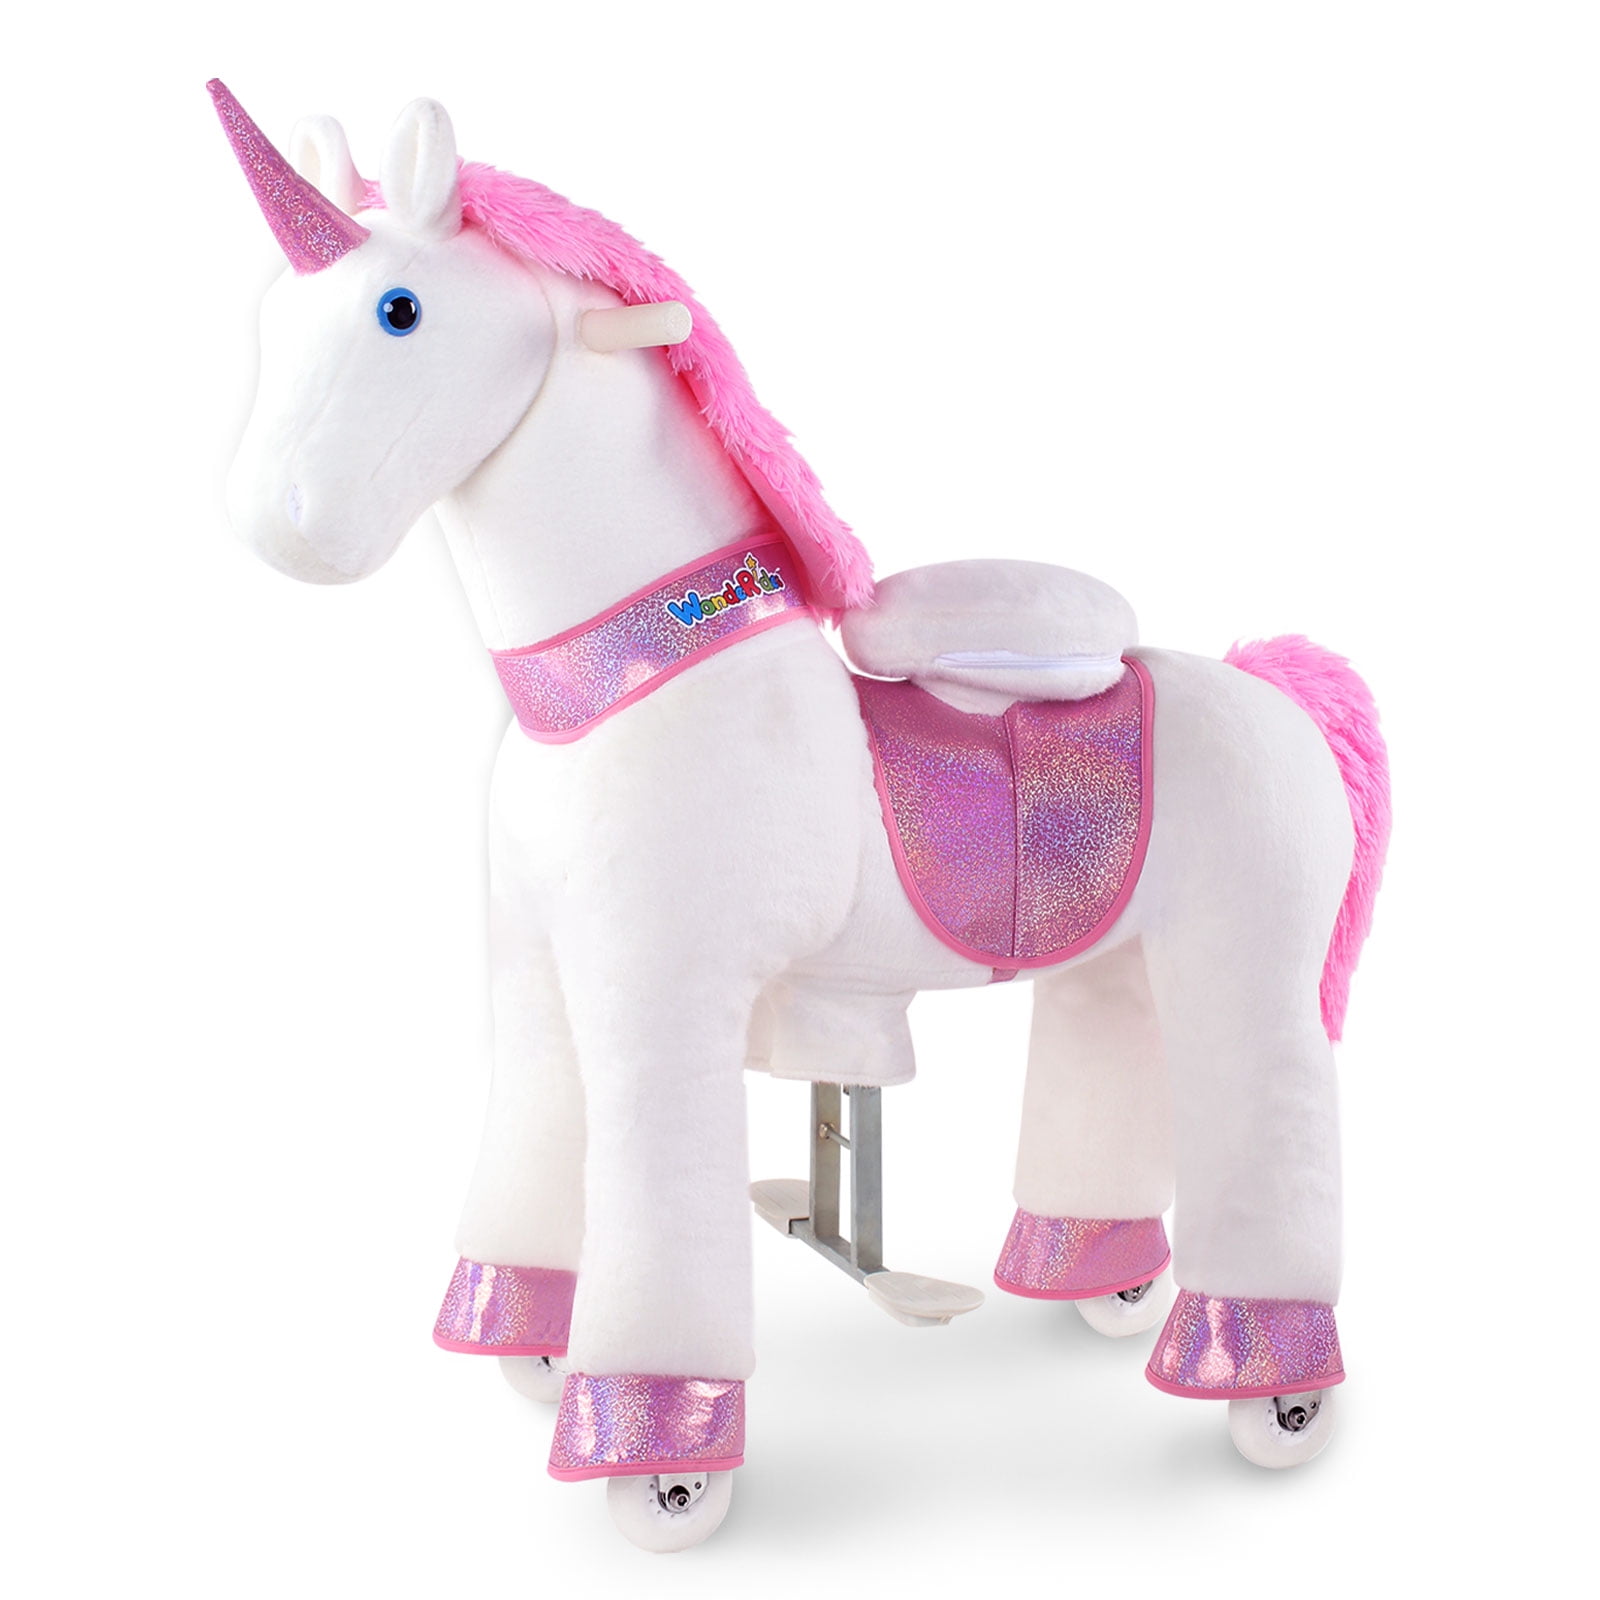 Toys For Girls Pony Bath Ages 3 4 5 6 7 8 9 Year Old Horse Great Fun Gift Pink 